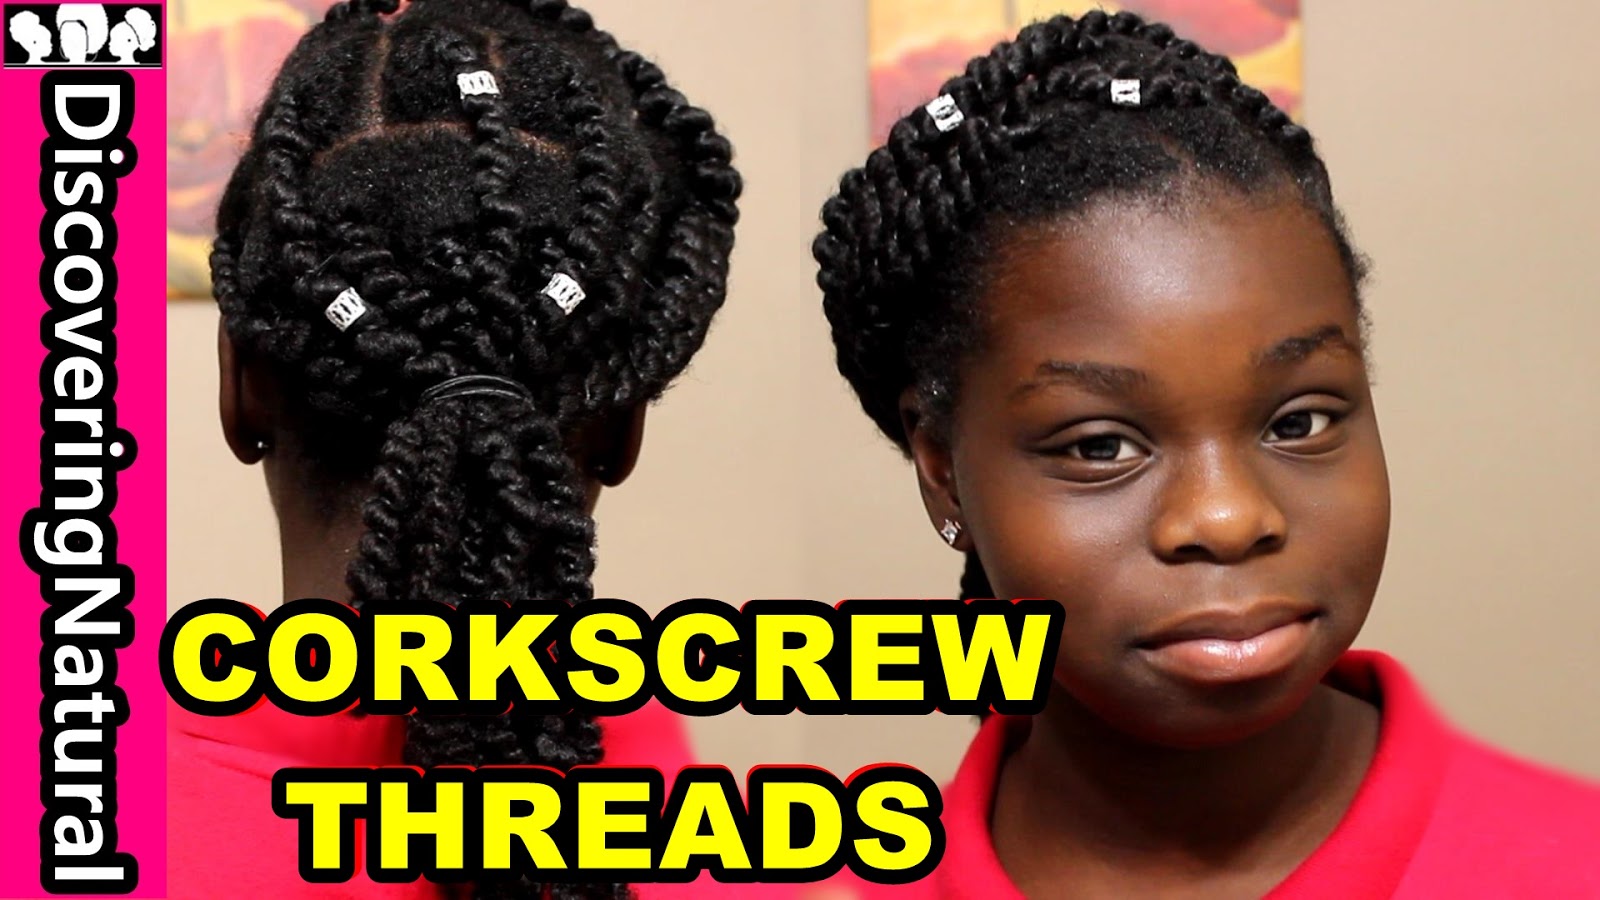 DIY AFRICAN THREADING TUTORIAL FOR BIGGINERS STEP-BY-STEP - YouTube